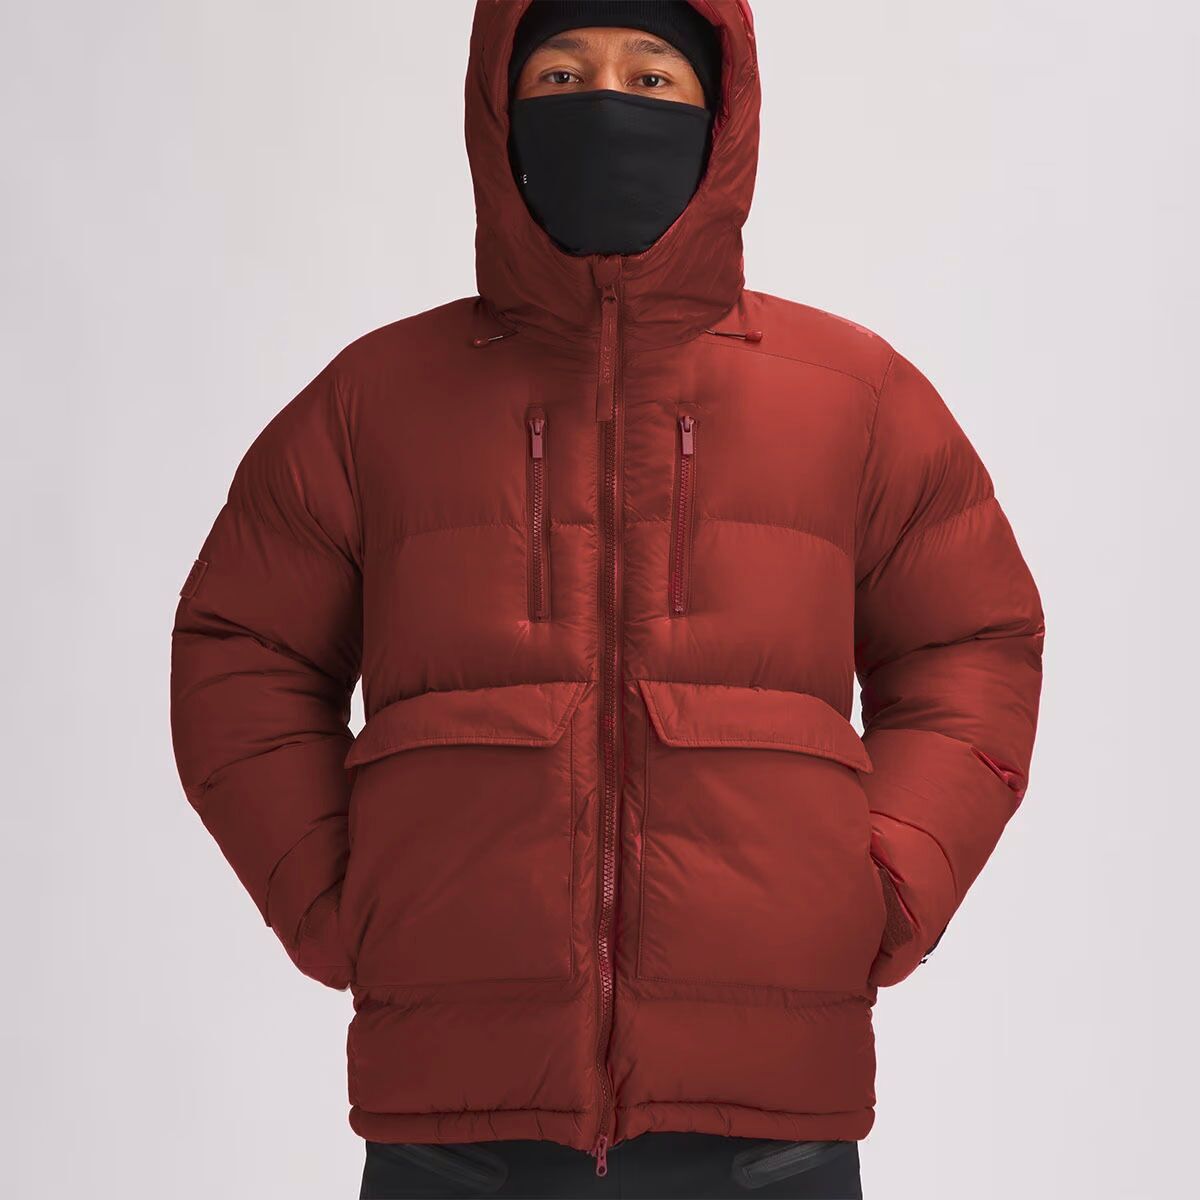 WHITESPACE SW Signature Puffy Jacket - Men's Faded Red